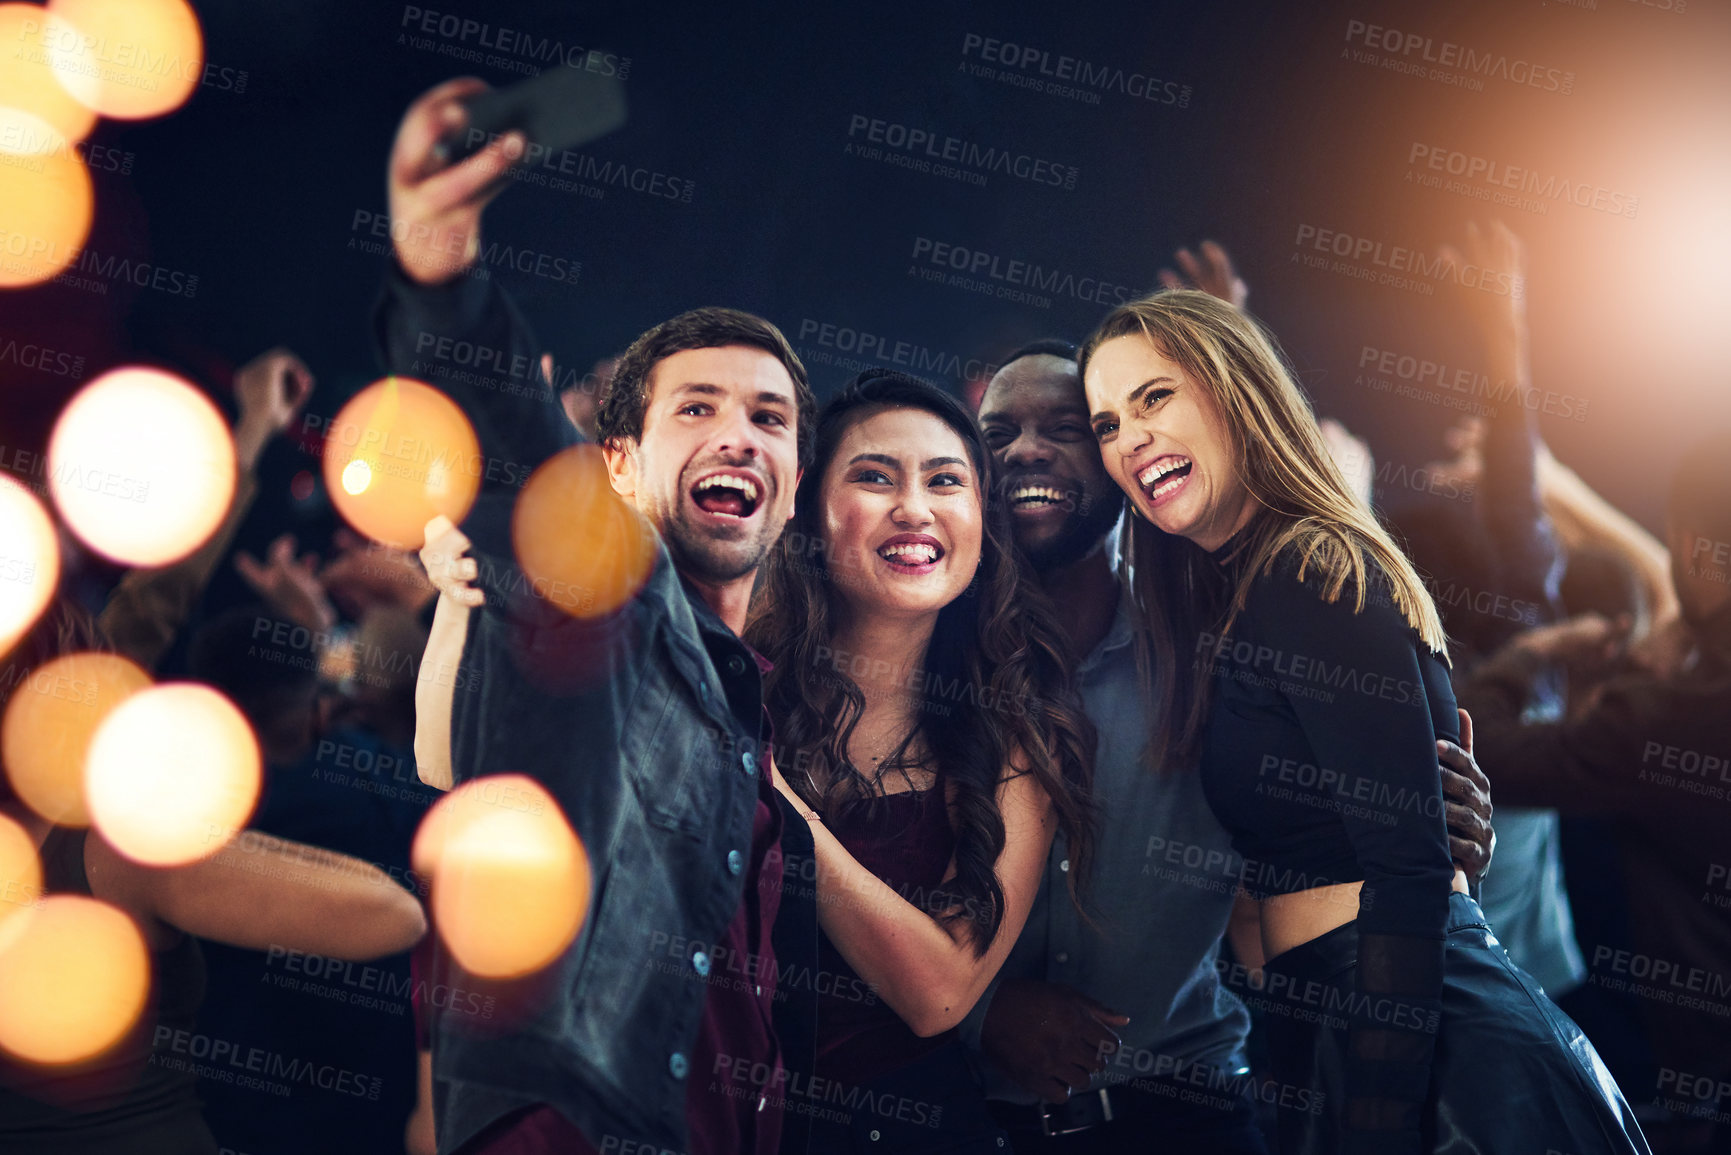 Buy stock photo Selfie, party and new year with diversity friends at an event together for celebration or nightlife fun. Crowd, photograph and birthday with a man and woman group posing for a picture at a dance